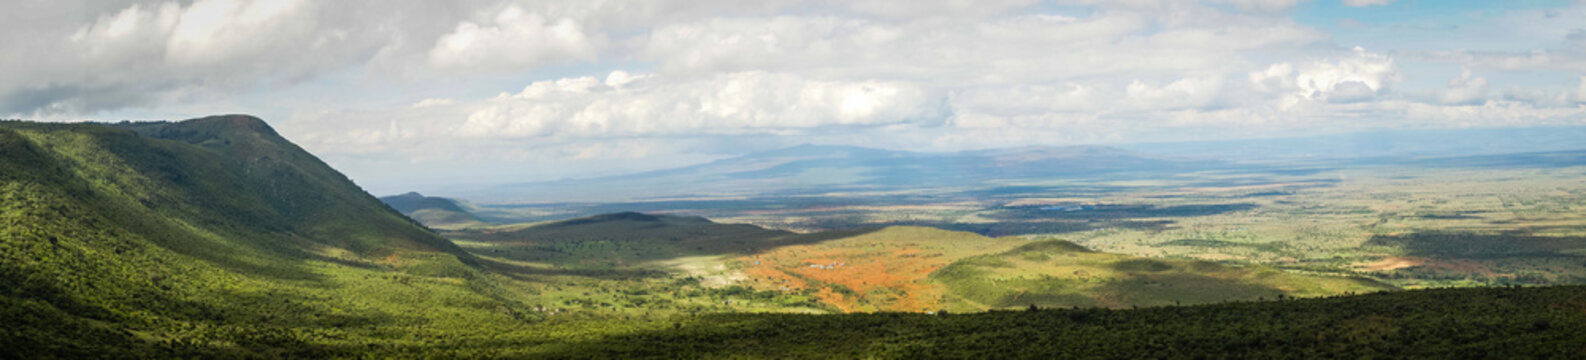 View of  African rift valley in Kenya